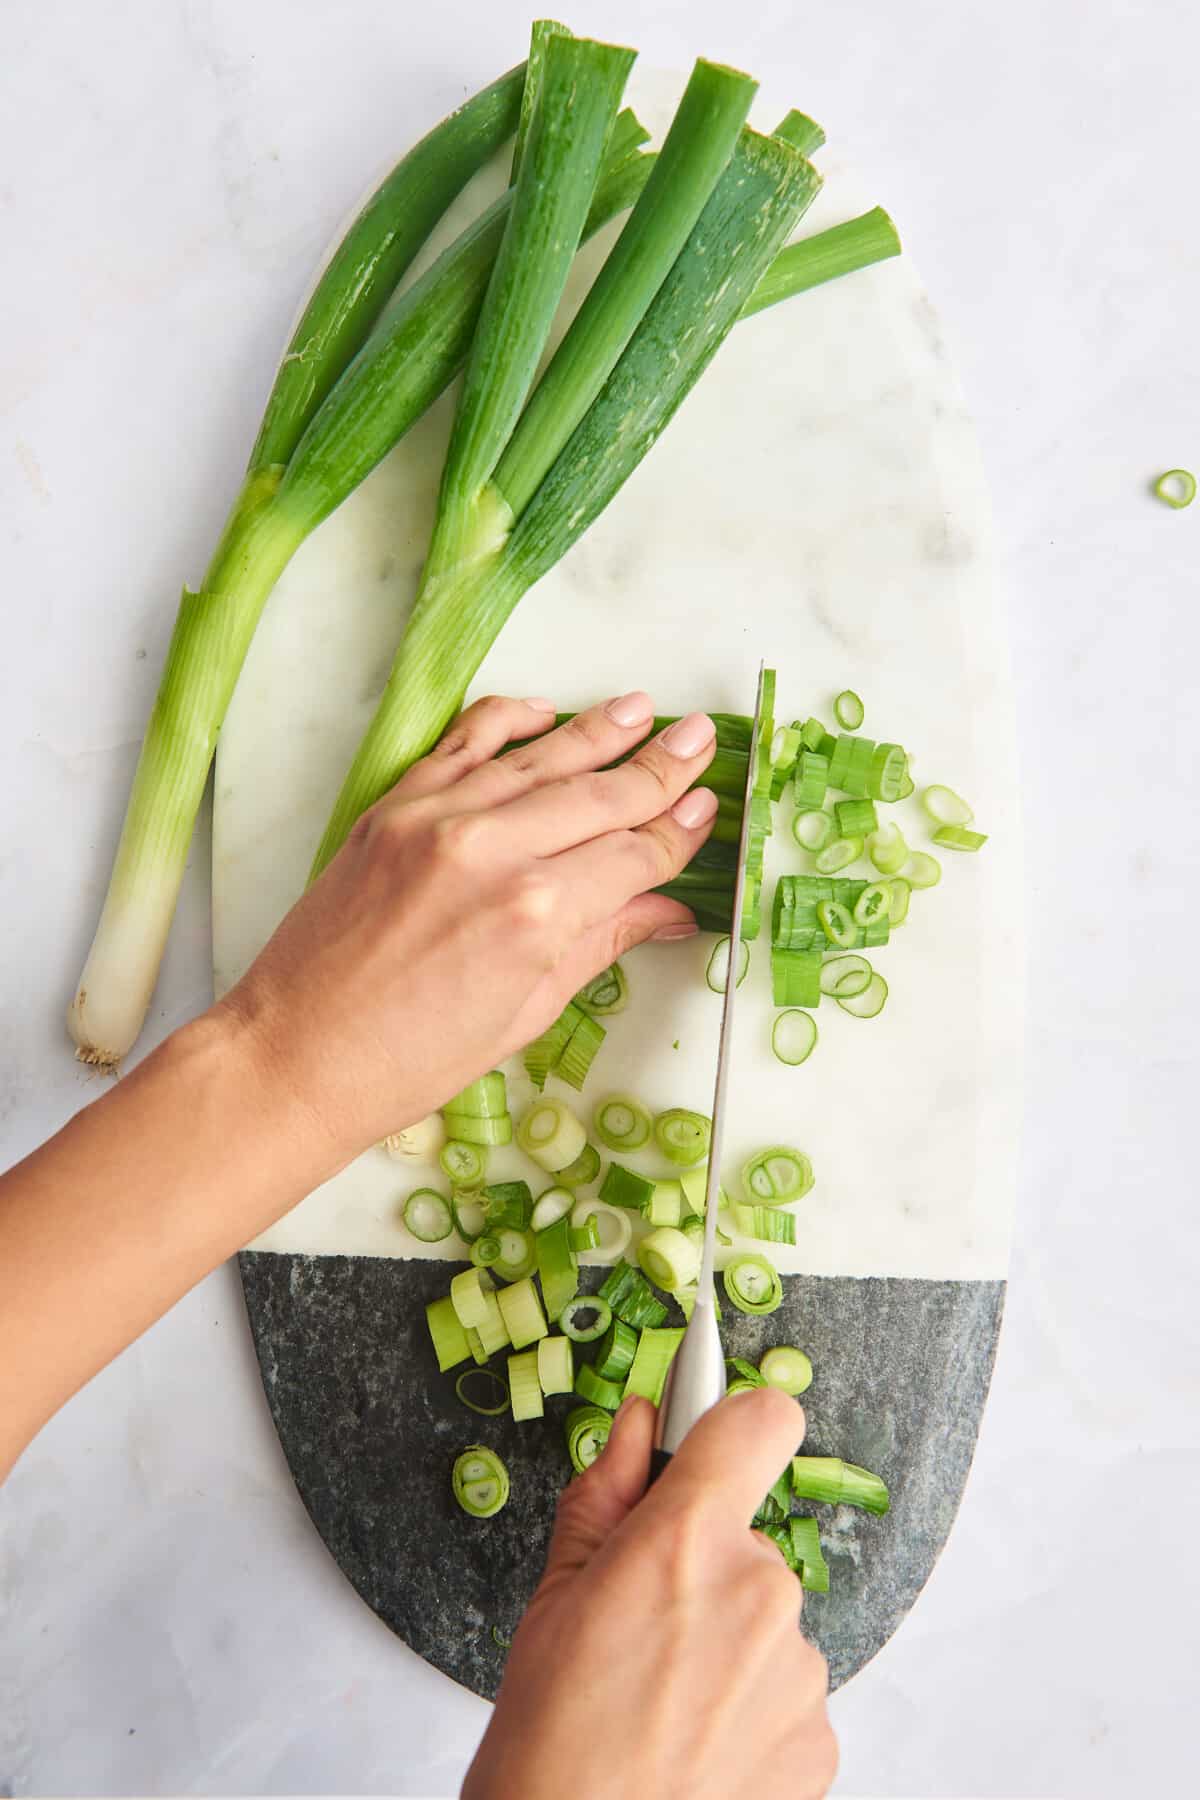 Green onions on a cutting board next to chopped green onions and a hand chopping scallions. 